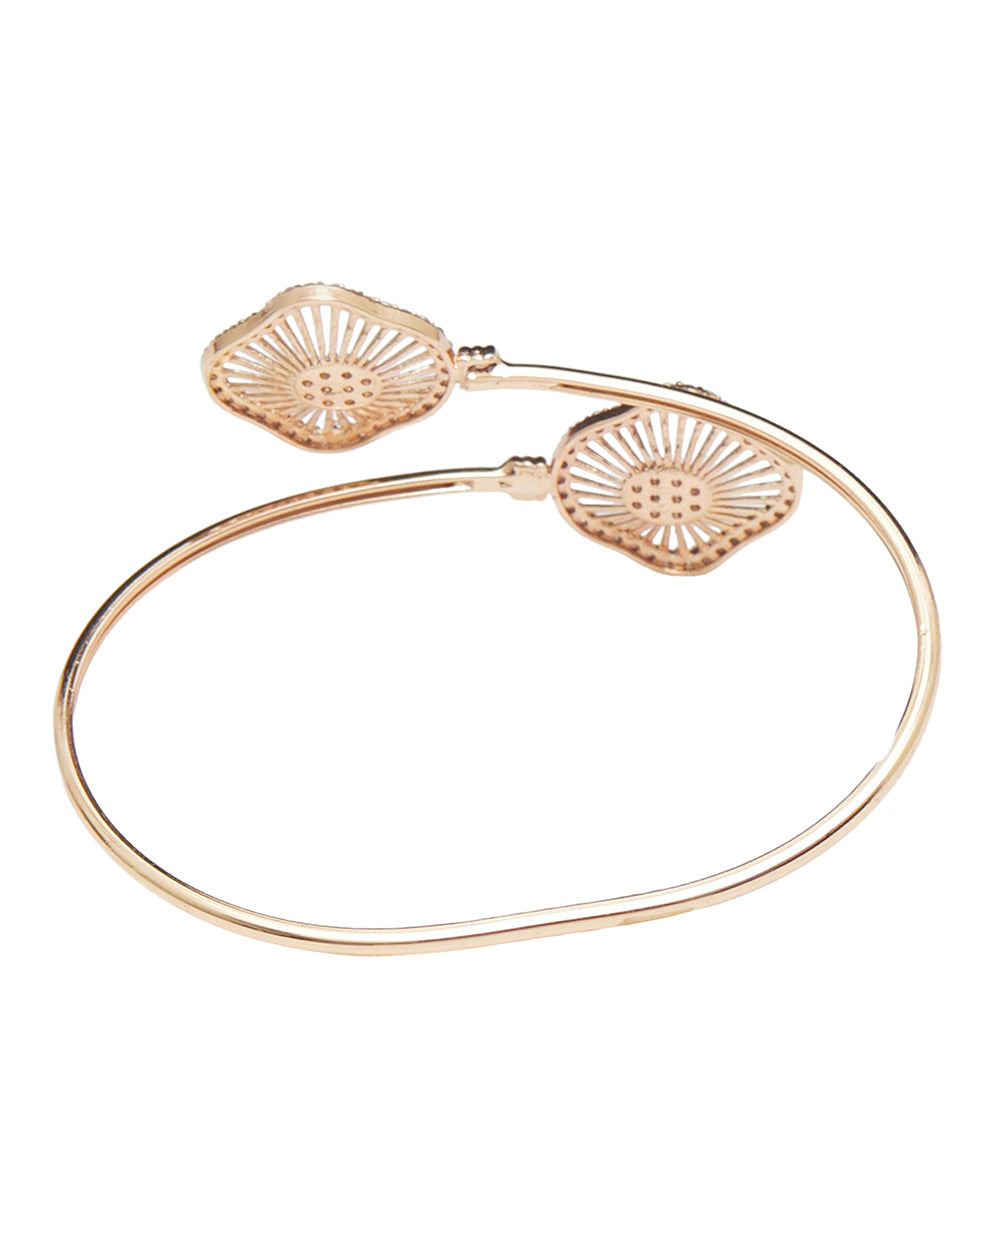 Women's Rose Gold Finish Bracelet With Double Motifs From Elegance Collection - Voylla